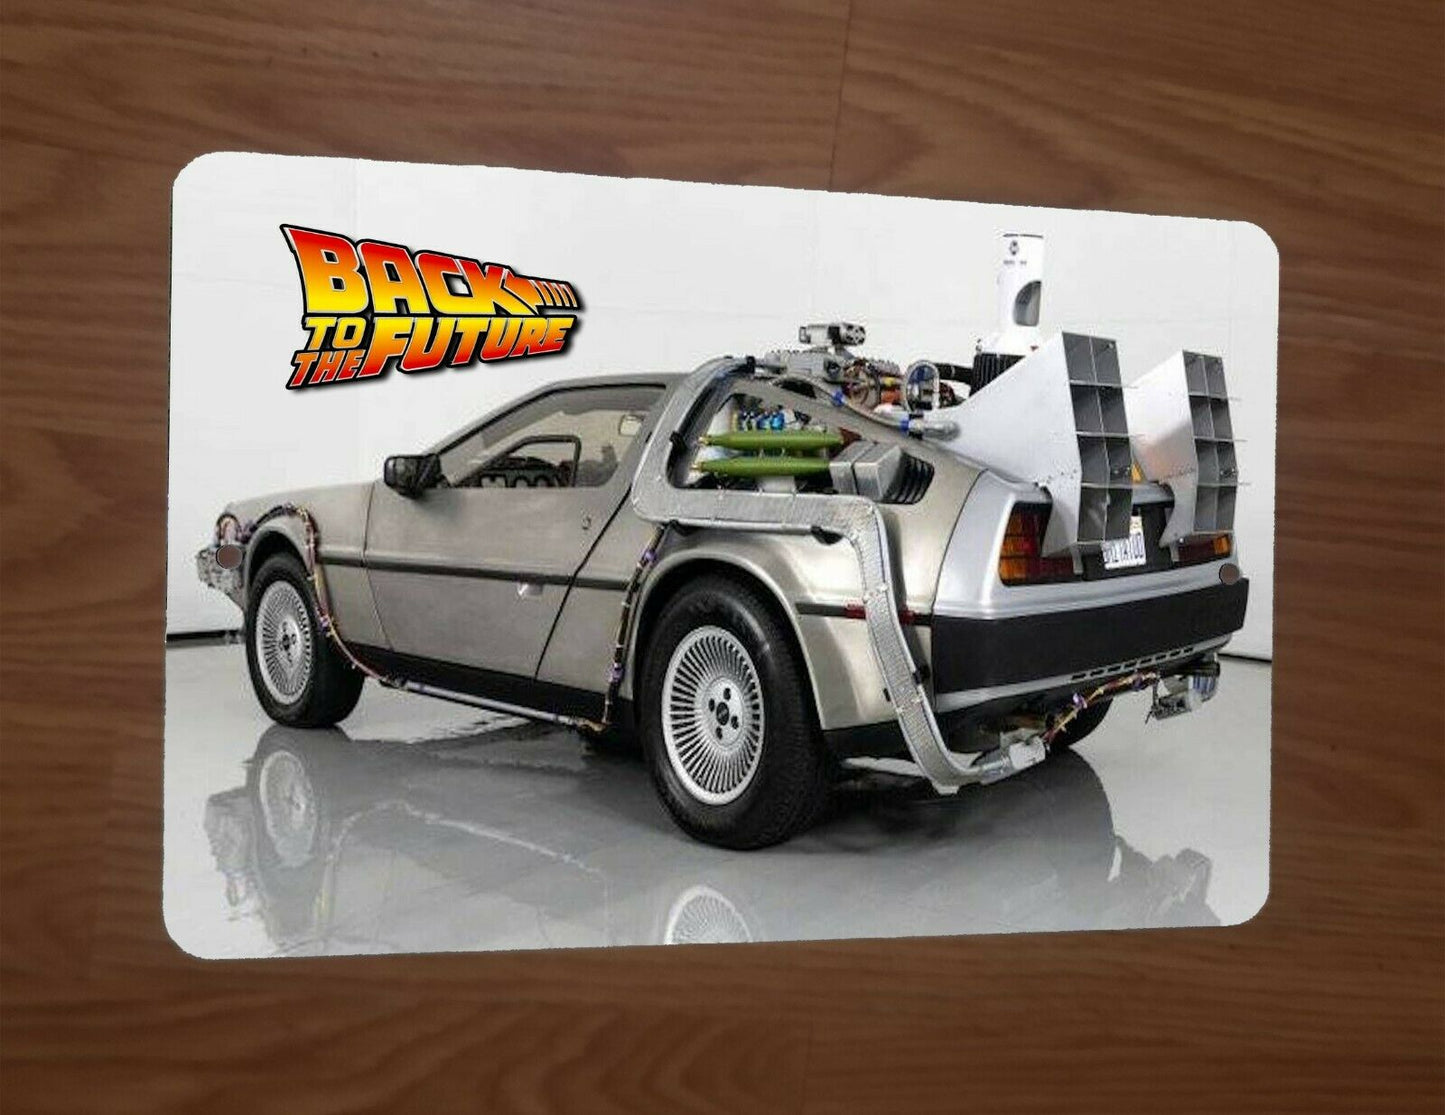 Back to the Future Delorean Car Photo 8x12 Metal Wall Comedy Sci-Fi Movie Poster Car Sign